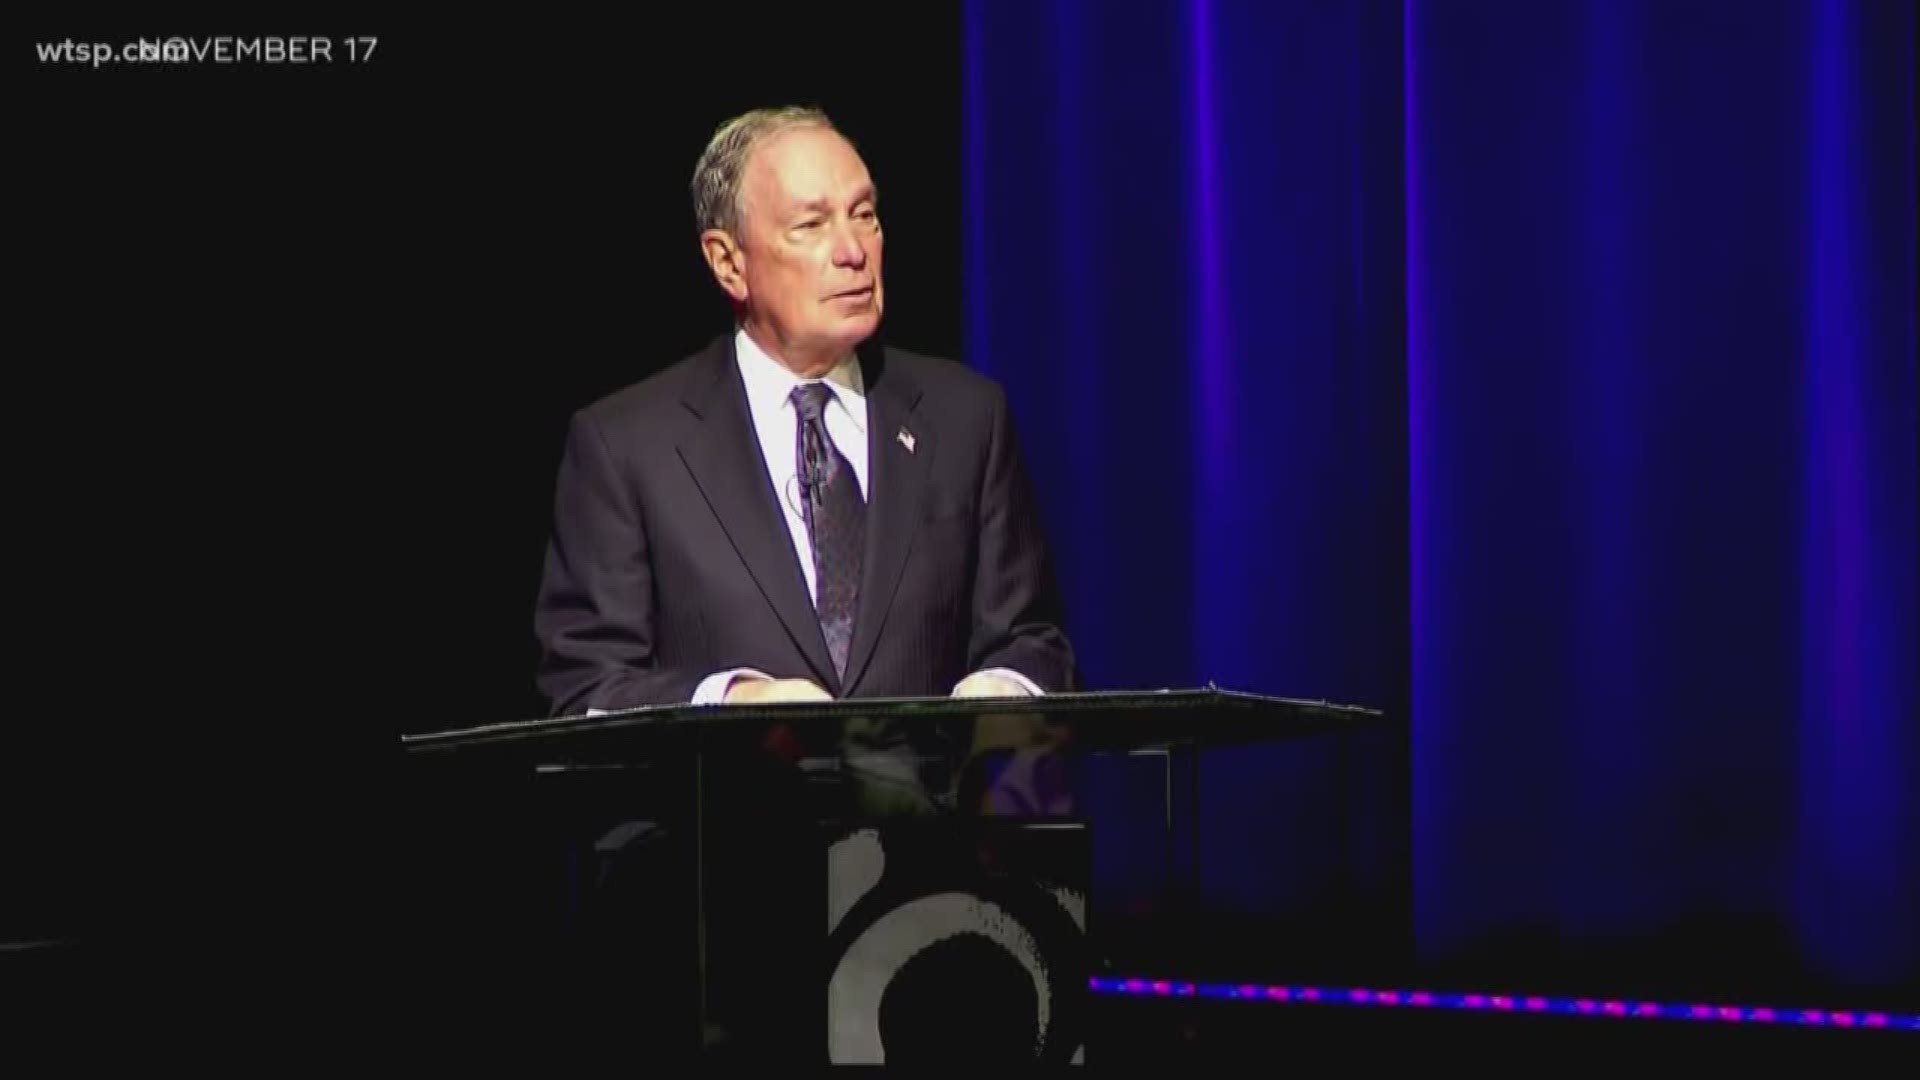 Bloomberg will meet with Tampa Mayor Jane Castor for Coffee before hosting a 2020 campaign event.